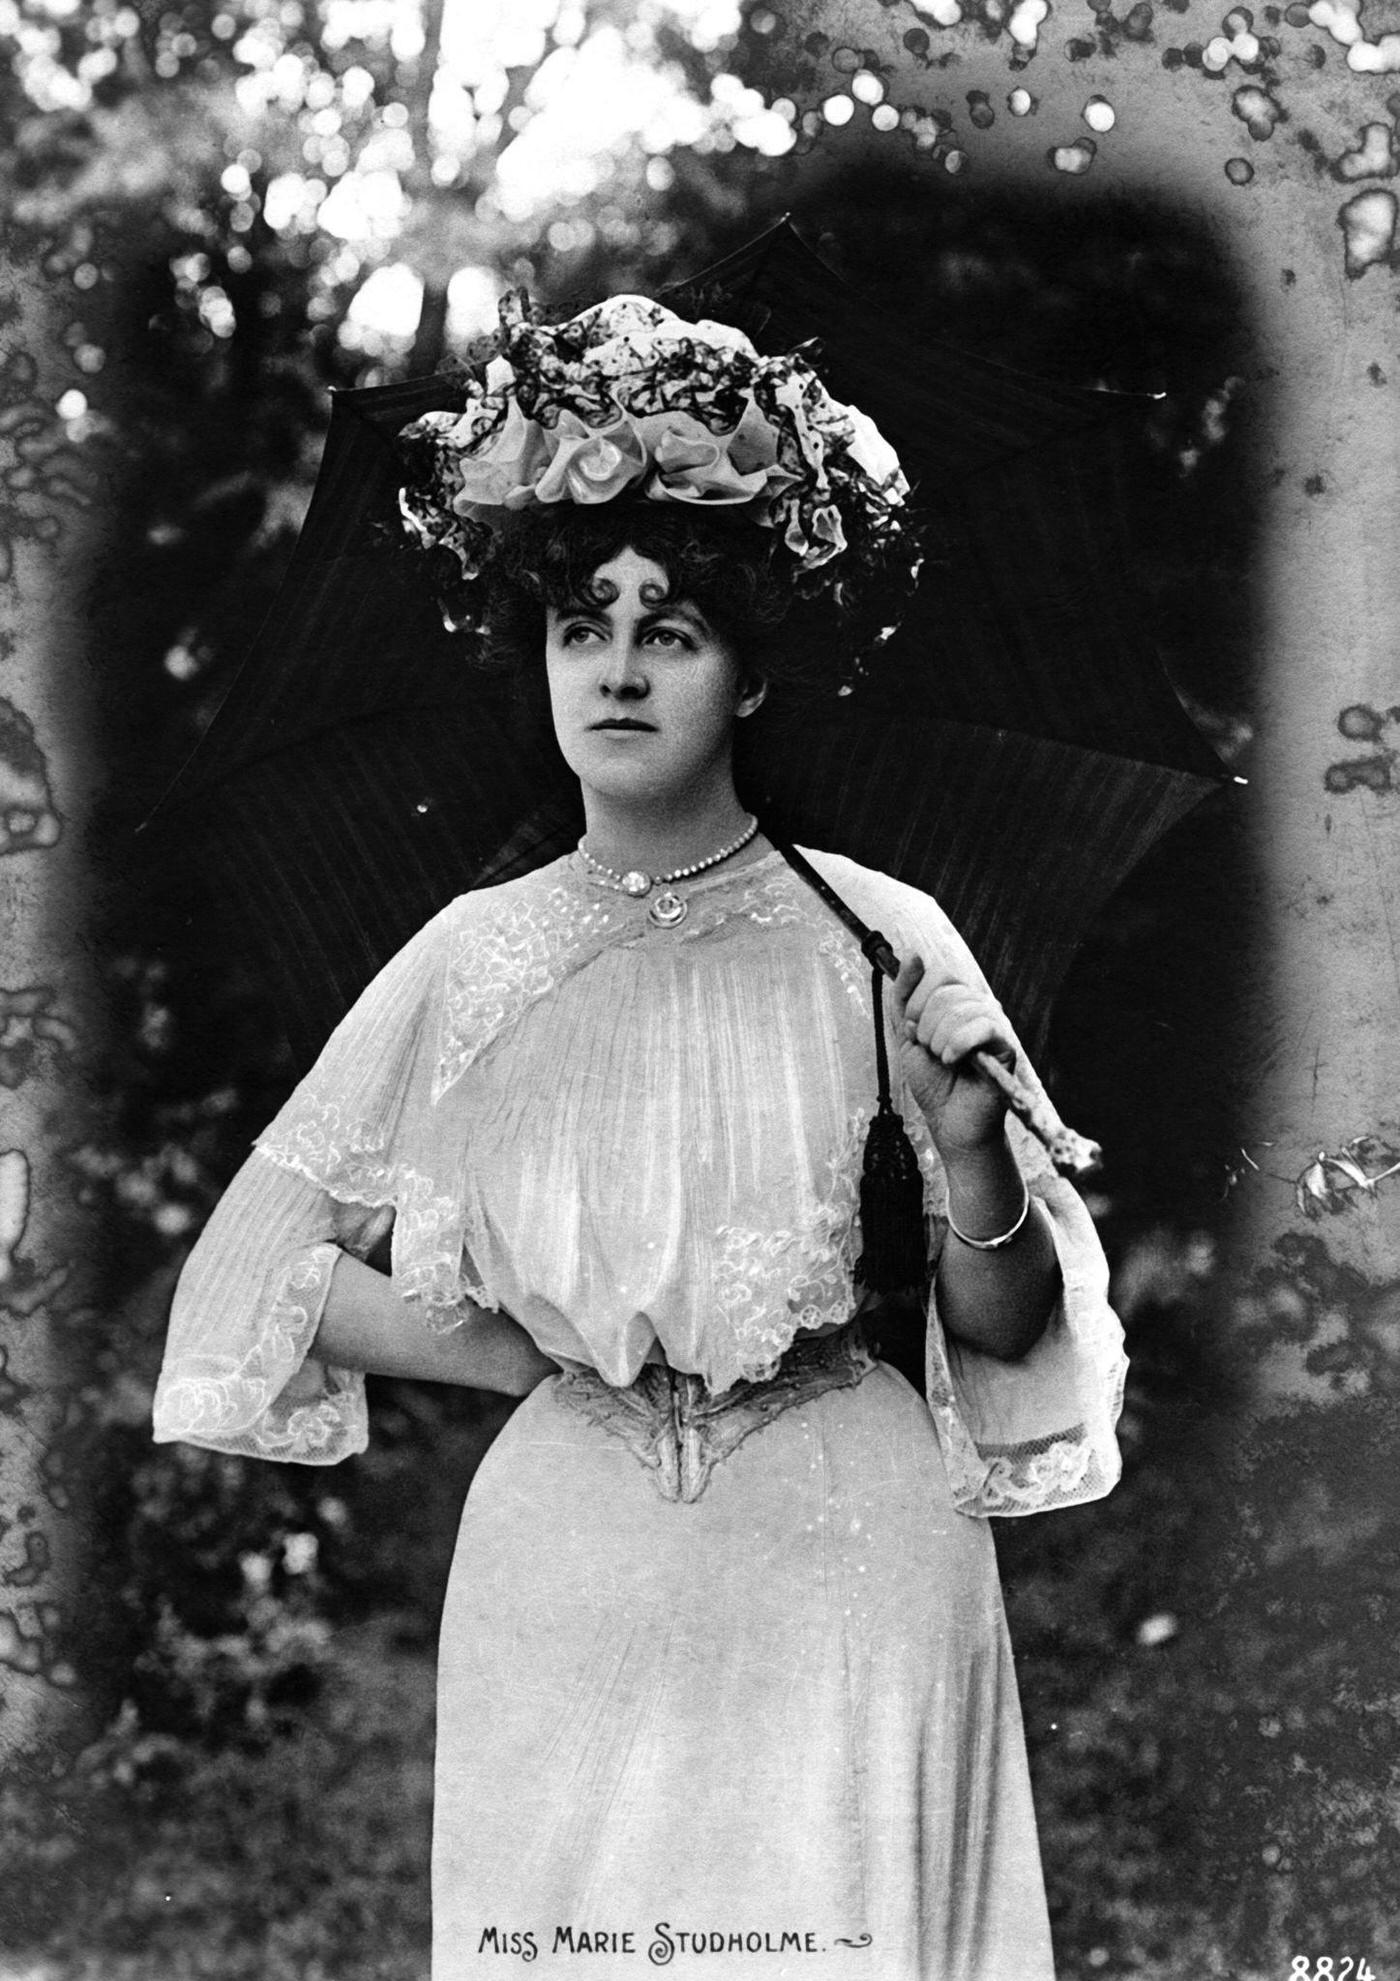 Marie Studholme looks stunning in this portrait from 1907